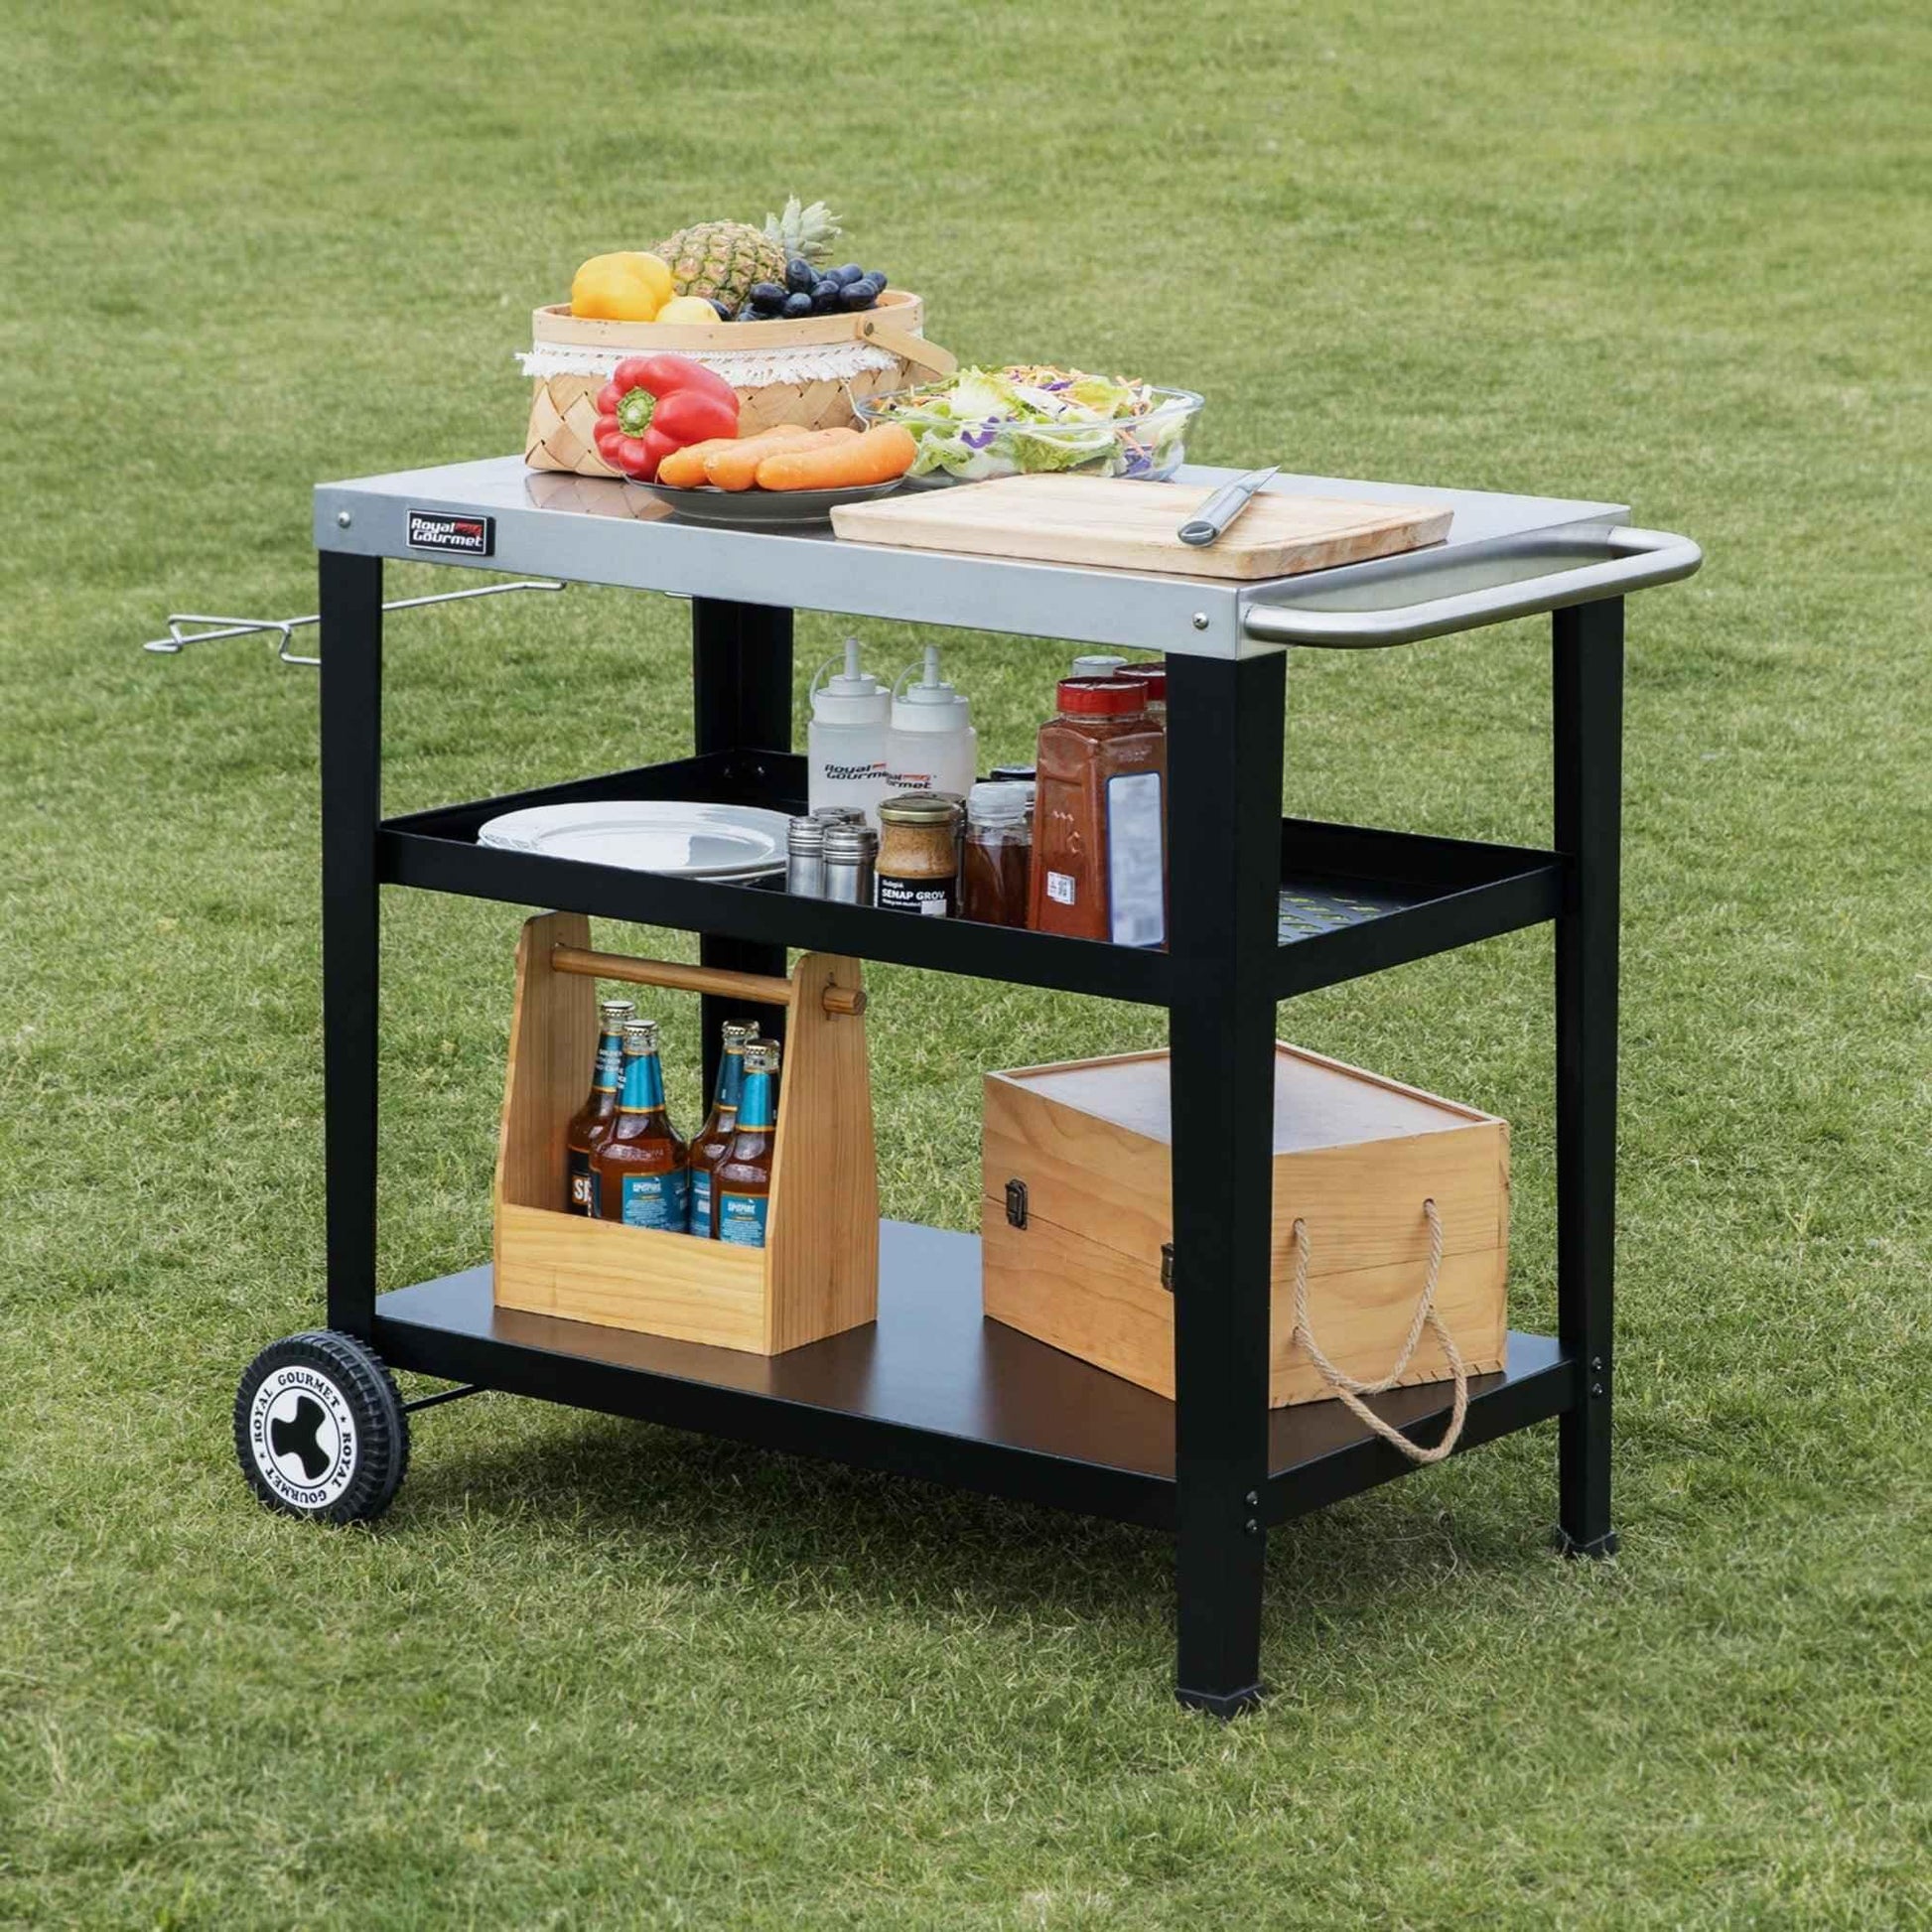 3-Shelf Stainless Steel Grill Cart with Wheels - Royal Gourmet